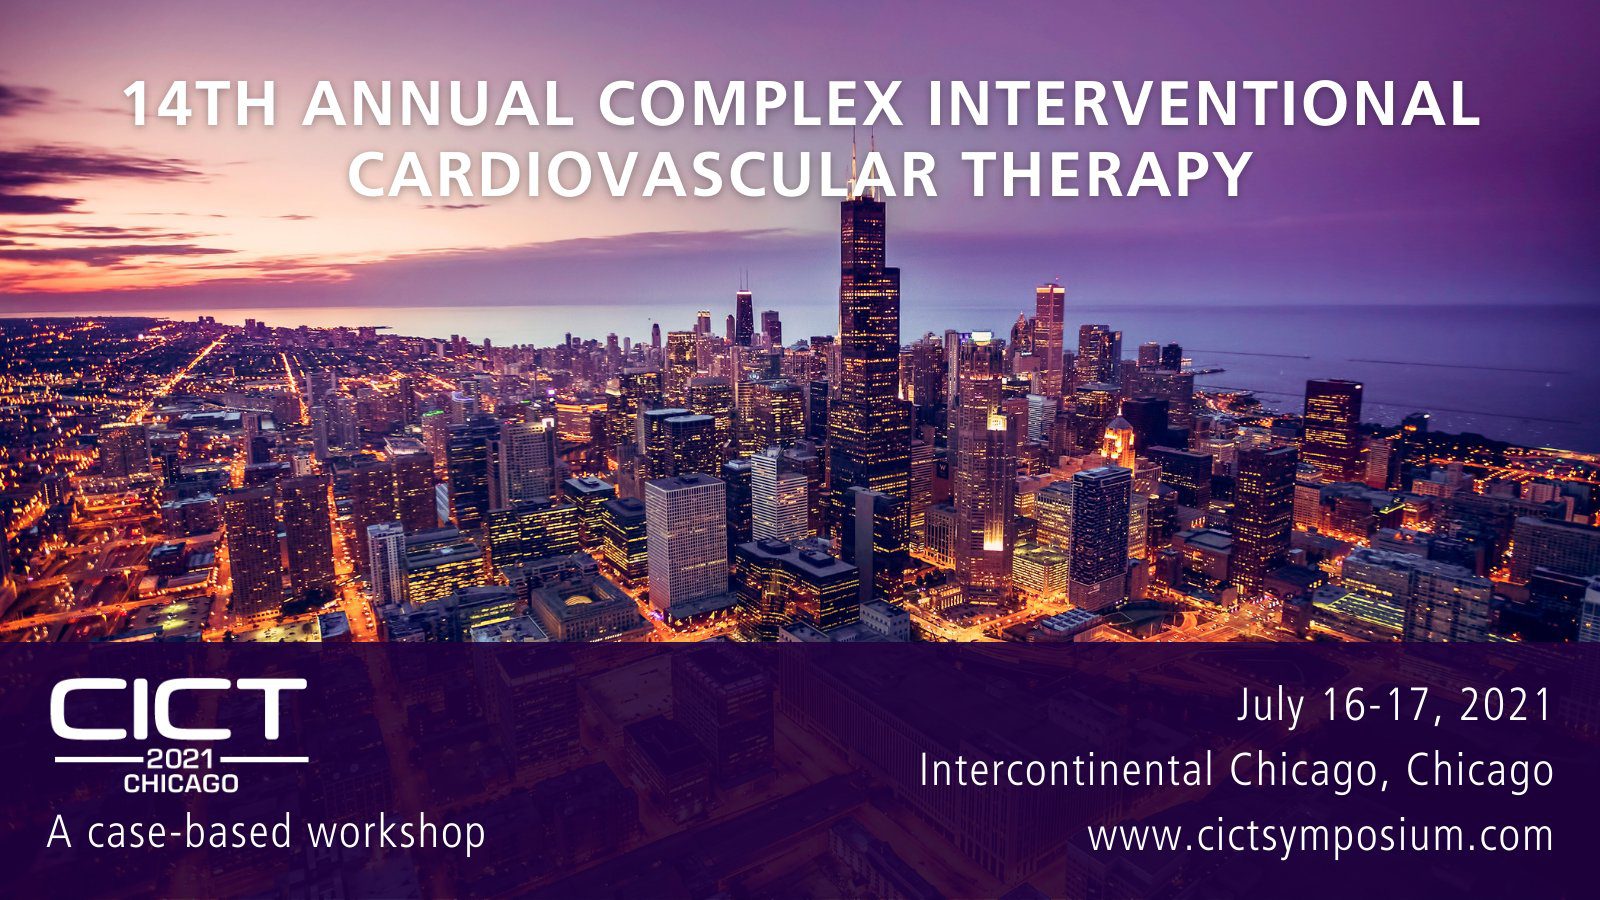 Complex Interventional Cardiovascular Therapy 2021